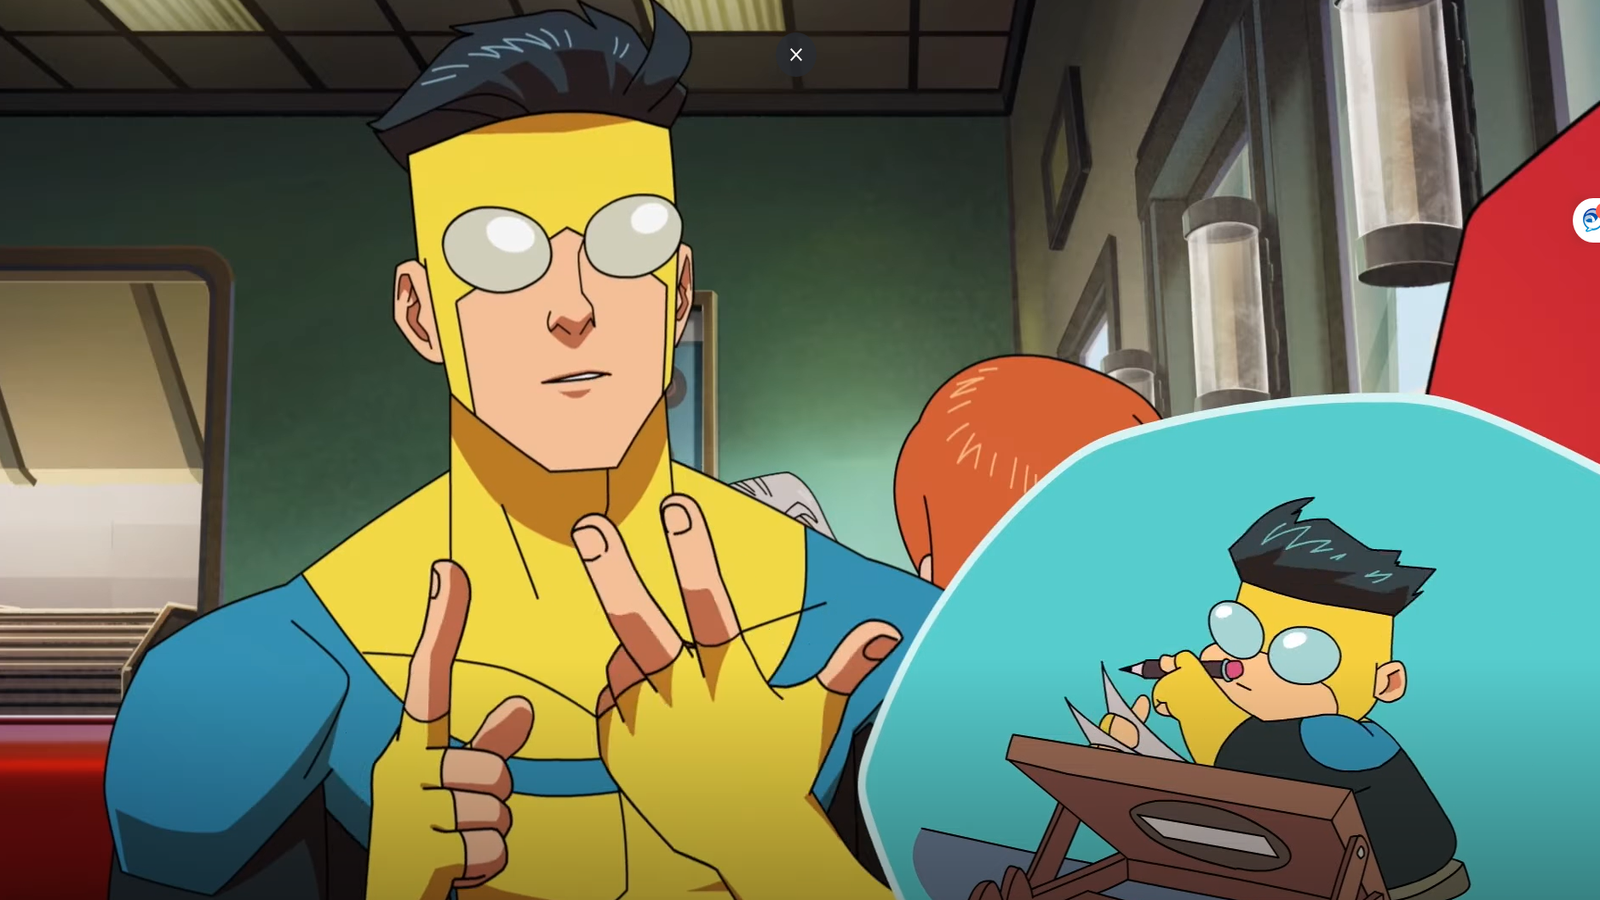 invincible season 2: What is the release date of Invincible Season